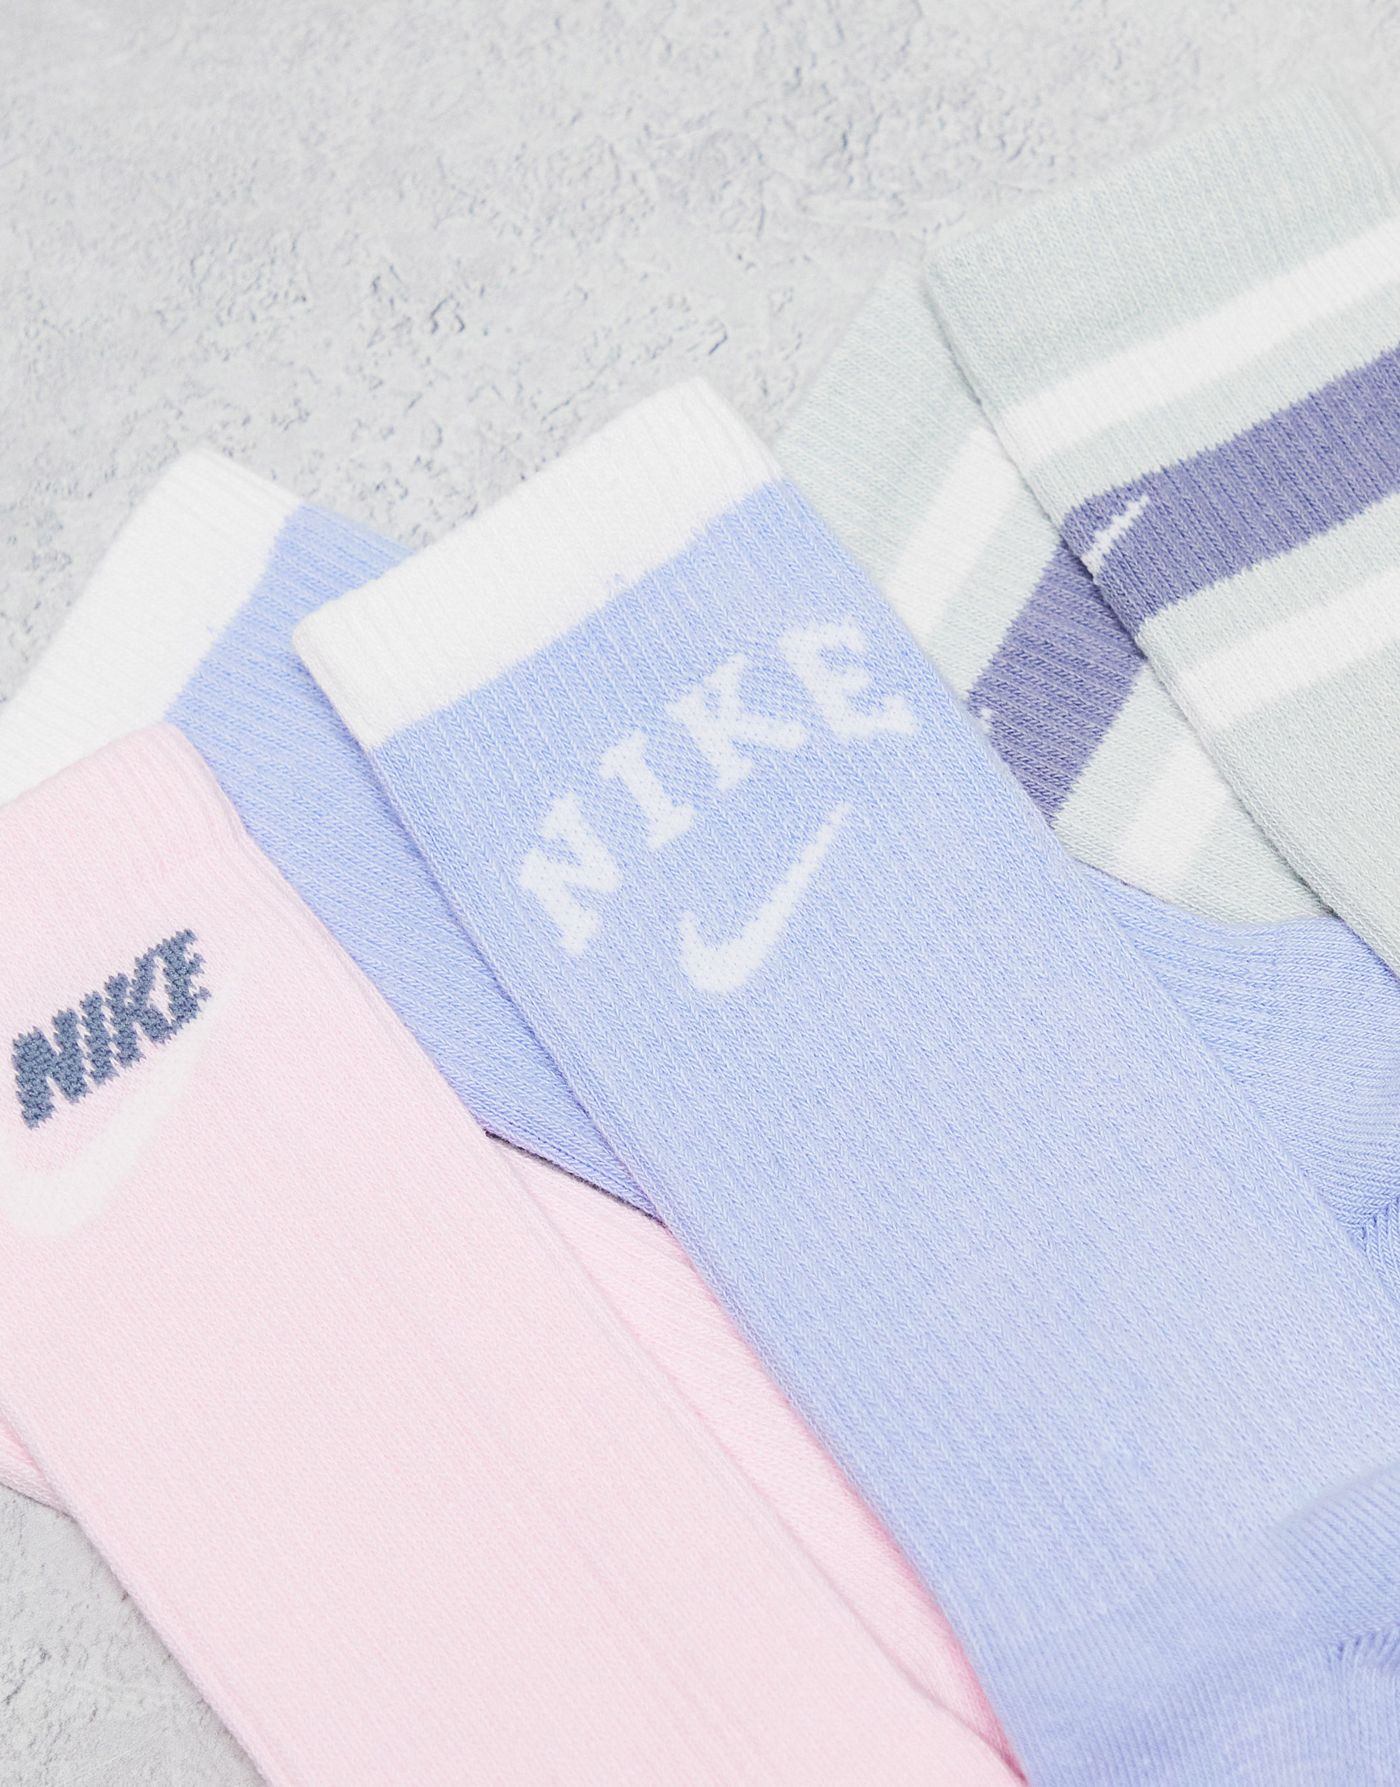 Nike Training Everyday Plus 3-pack retro socks in silver, cobalt and pink